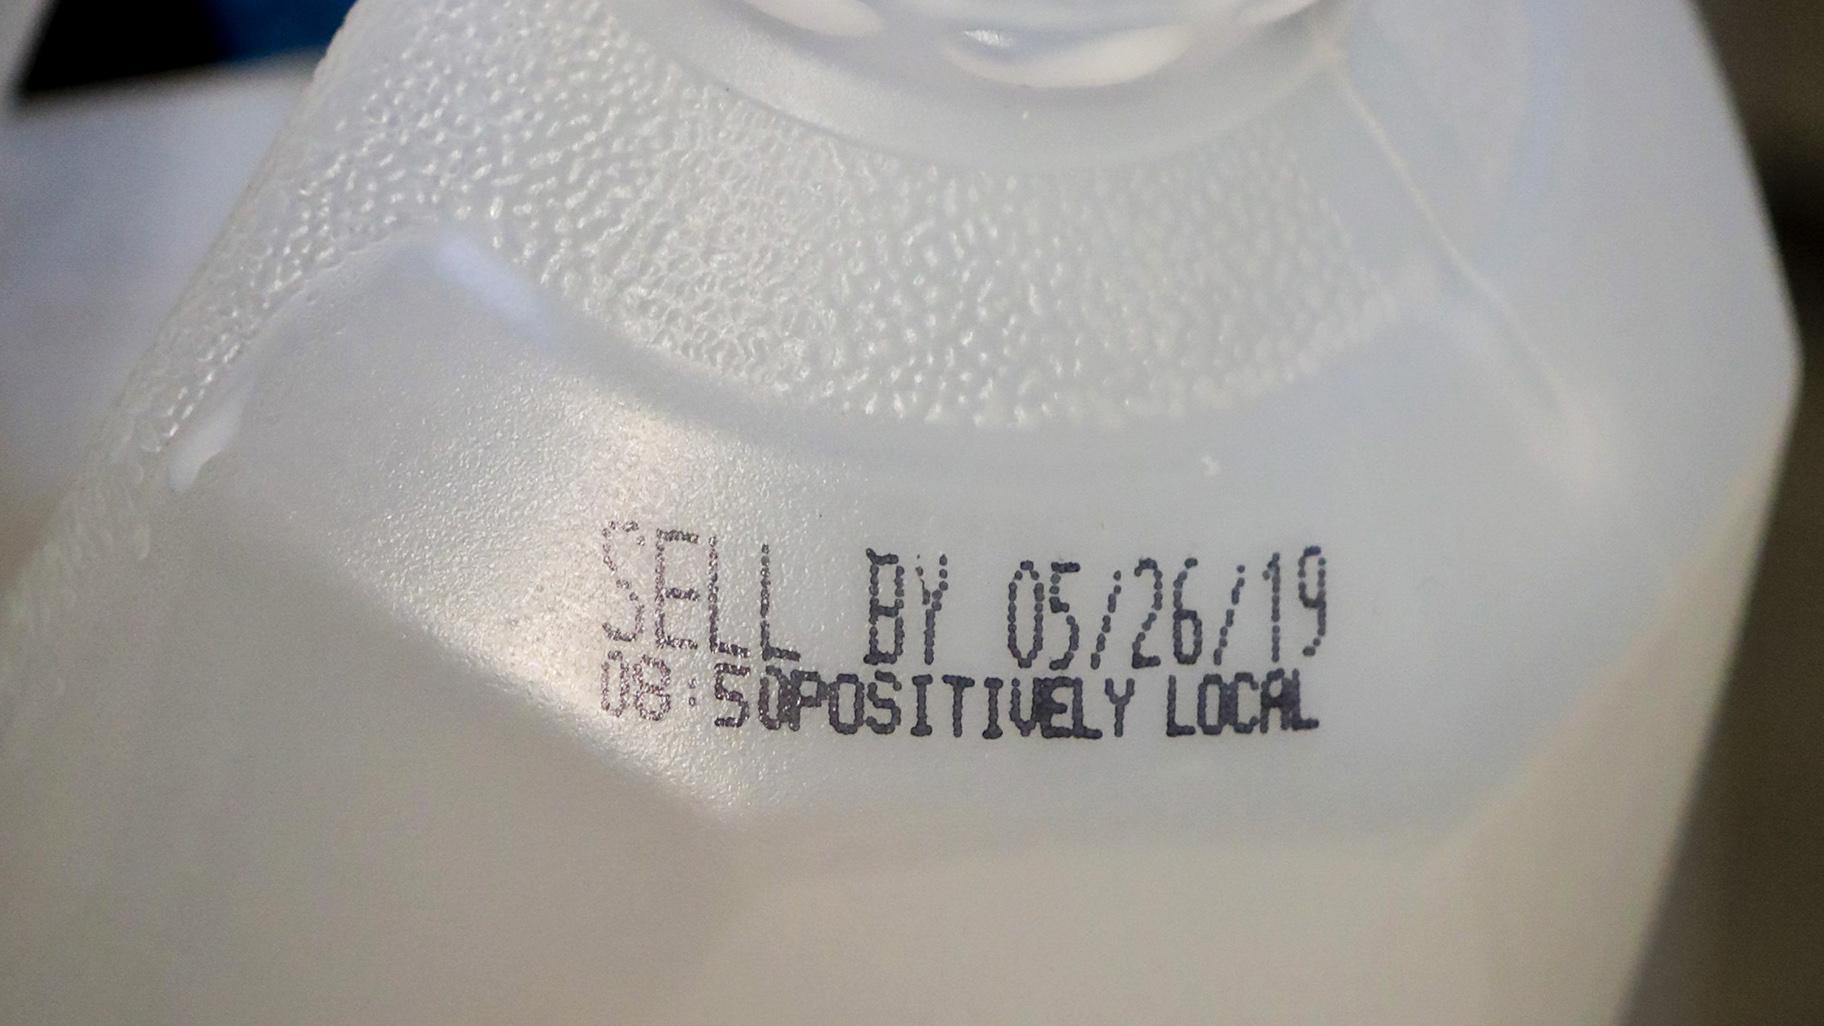 Sell By' or What? US Pushes for Clarity on Expiration Dates | Chicago News  | WTTW